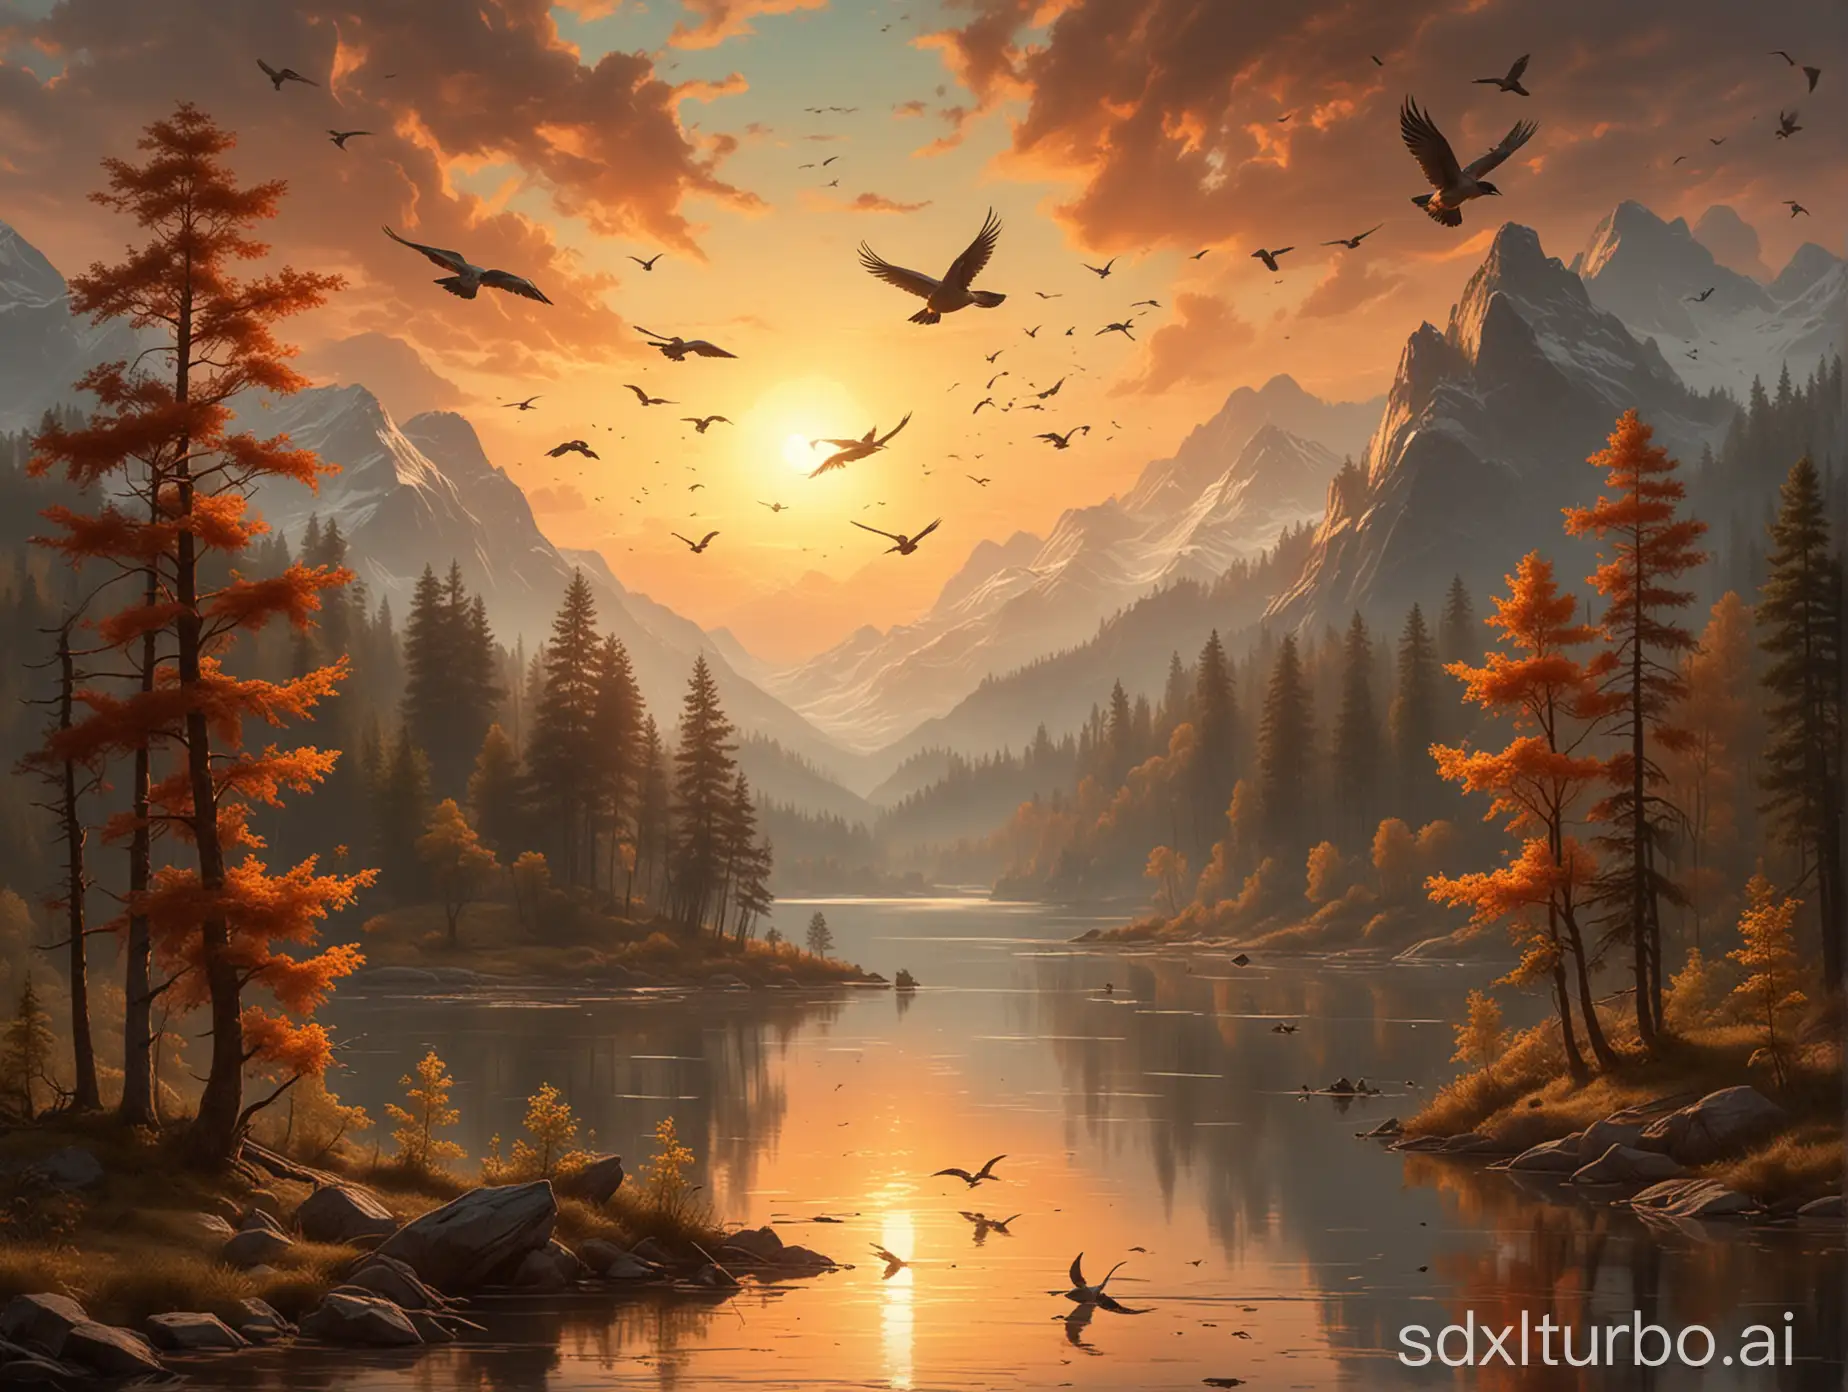 Flying birds backlit by the sunset over a beautiful landscape of forests, mountains and lakes, in the style of Johann Jakob Frey